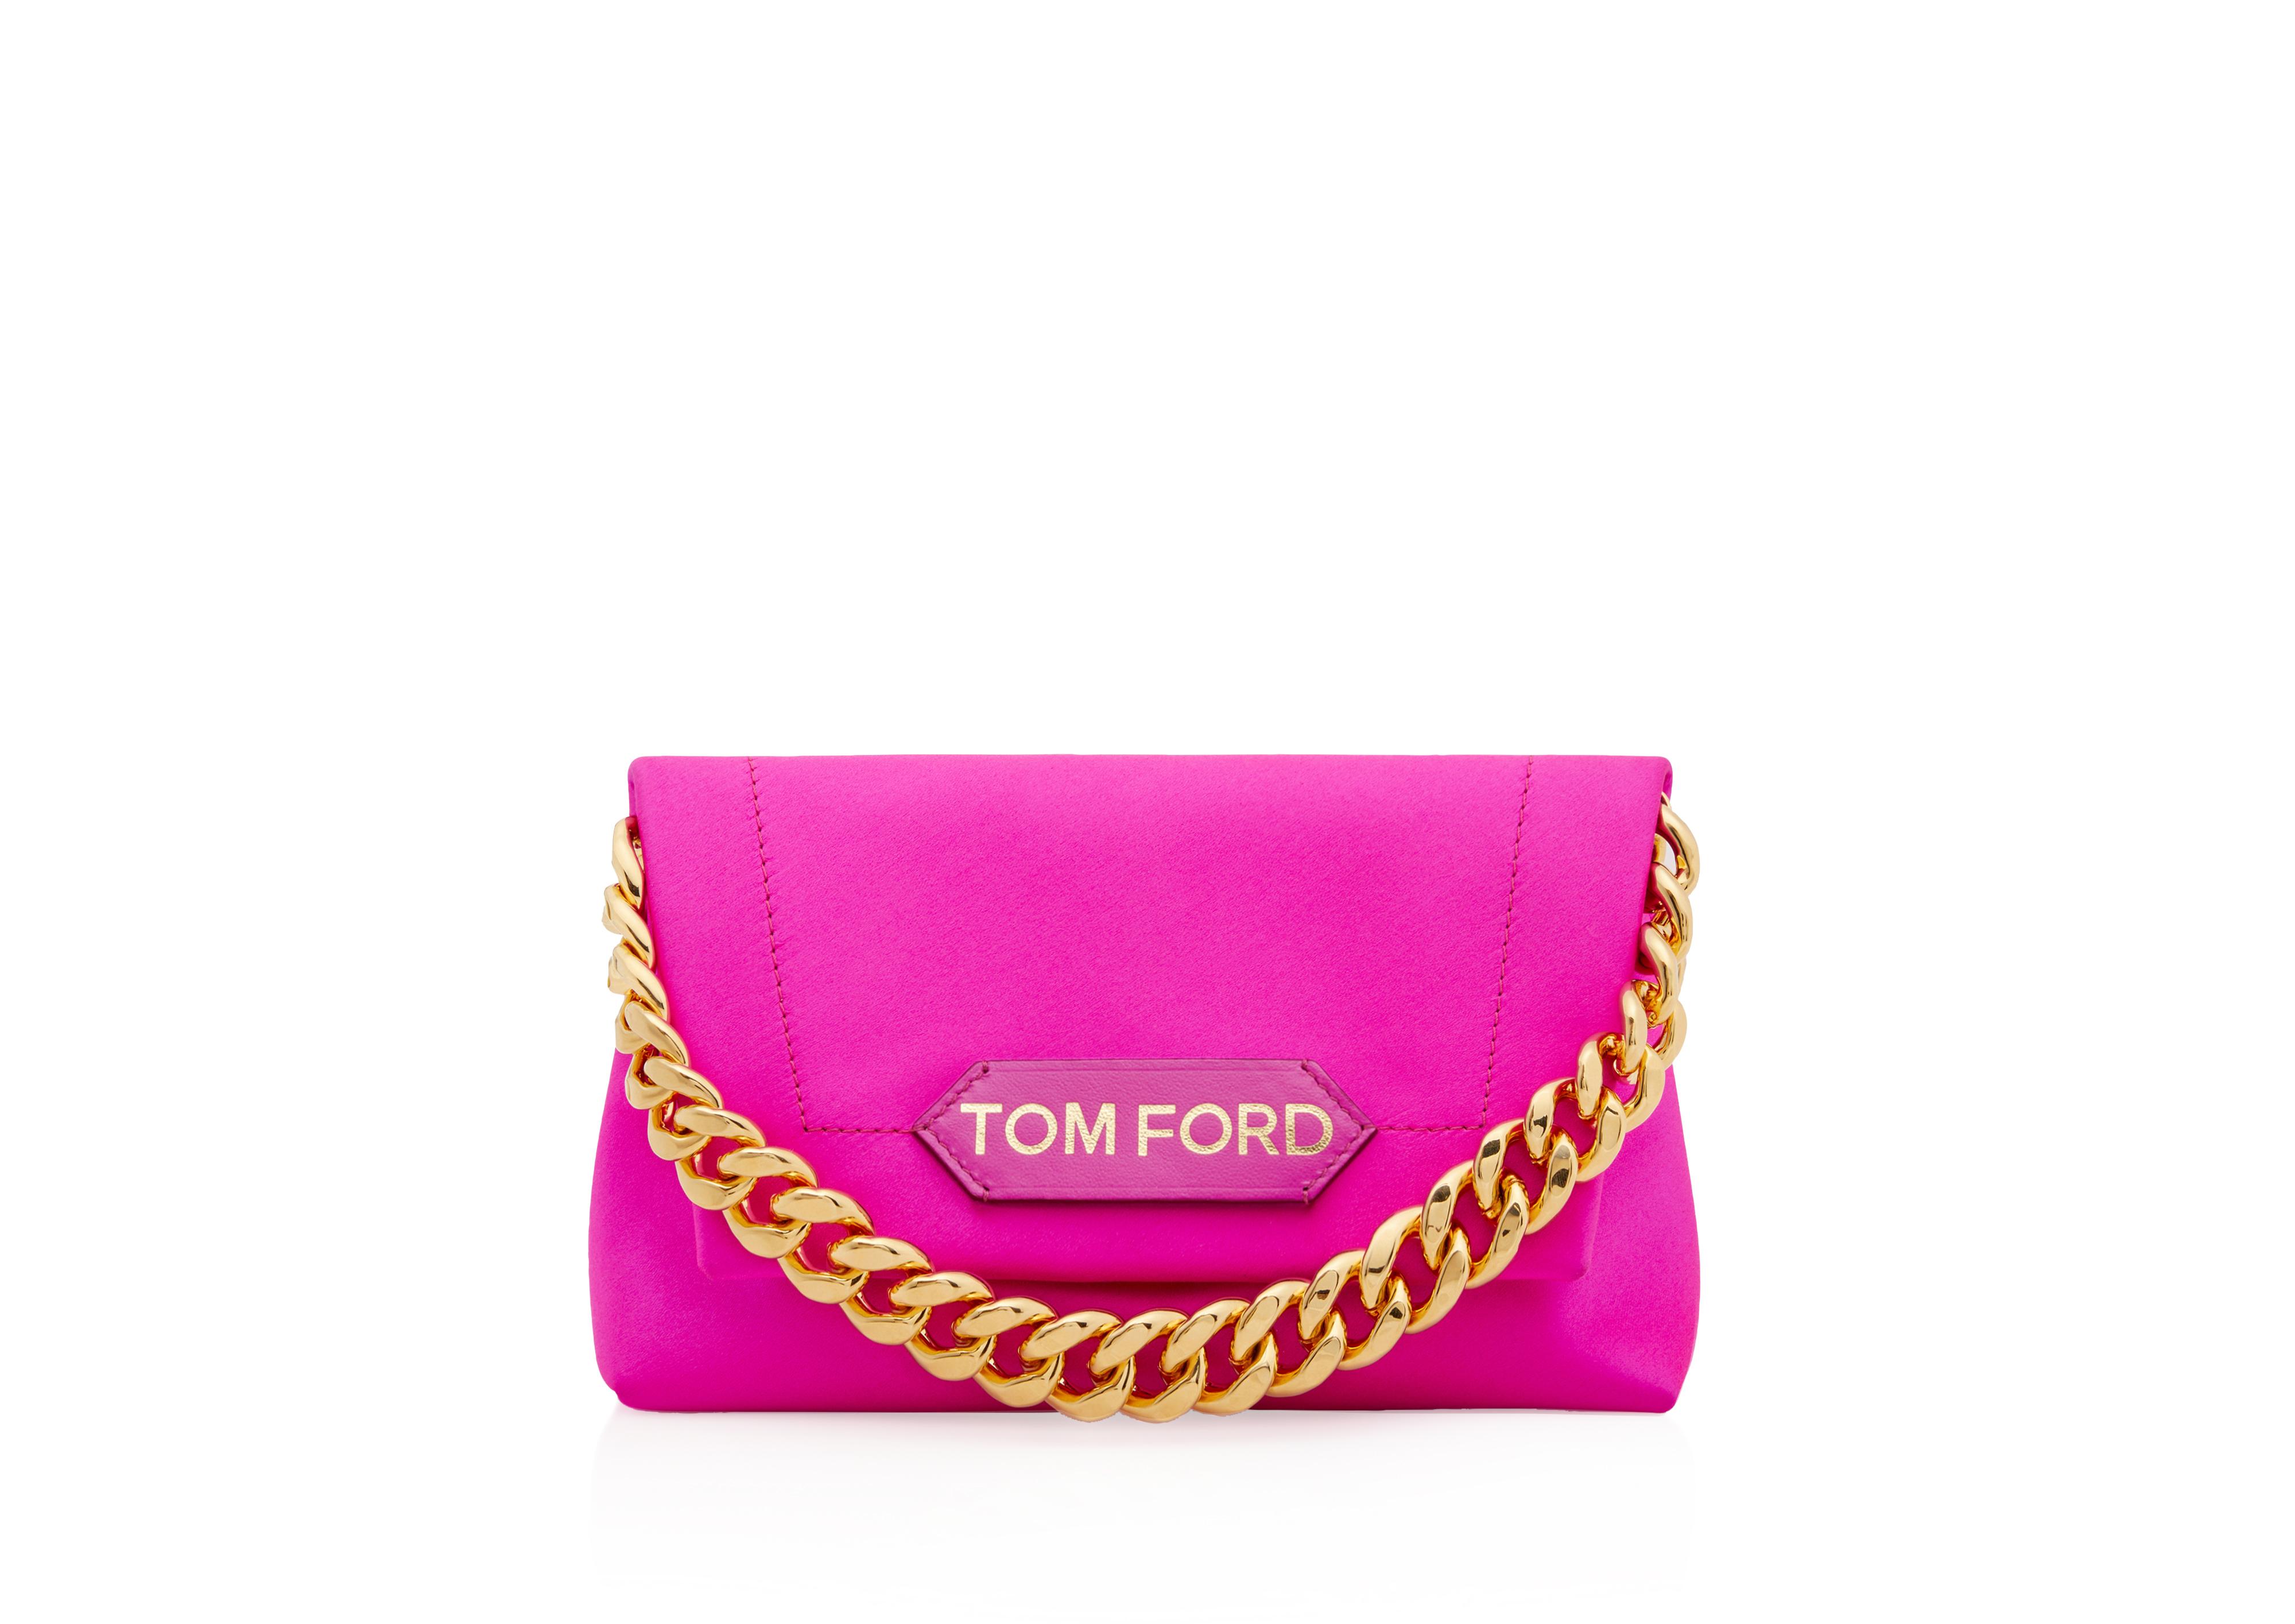 Tom Ford Label Leather-trimmed Satin Clutch in Pink